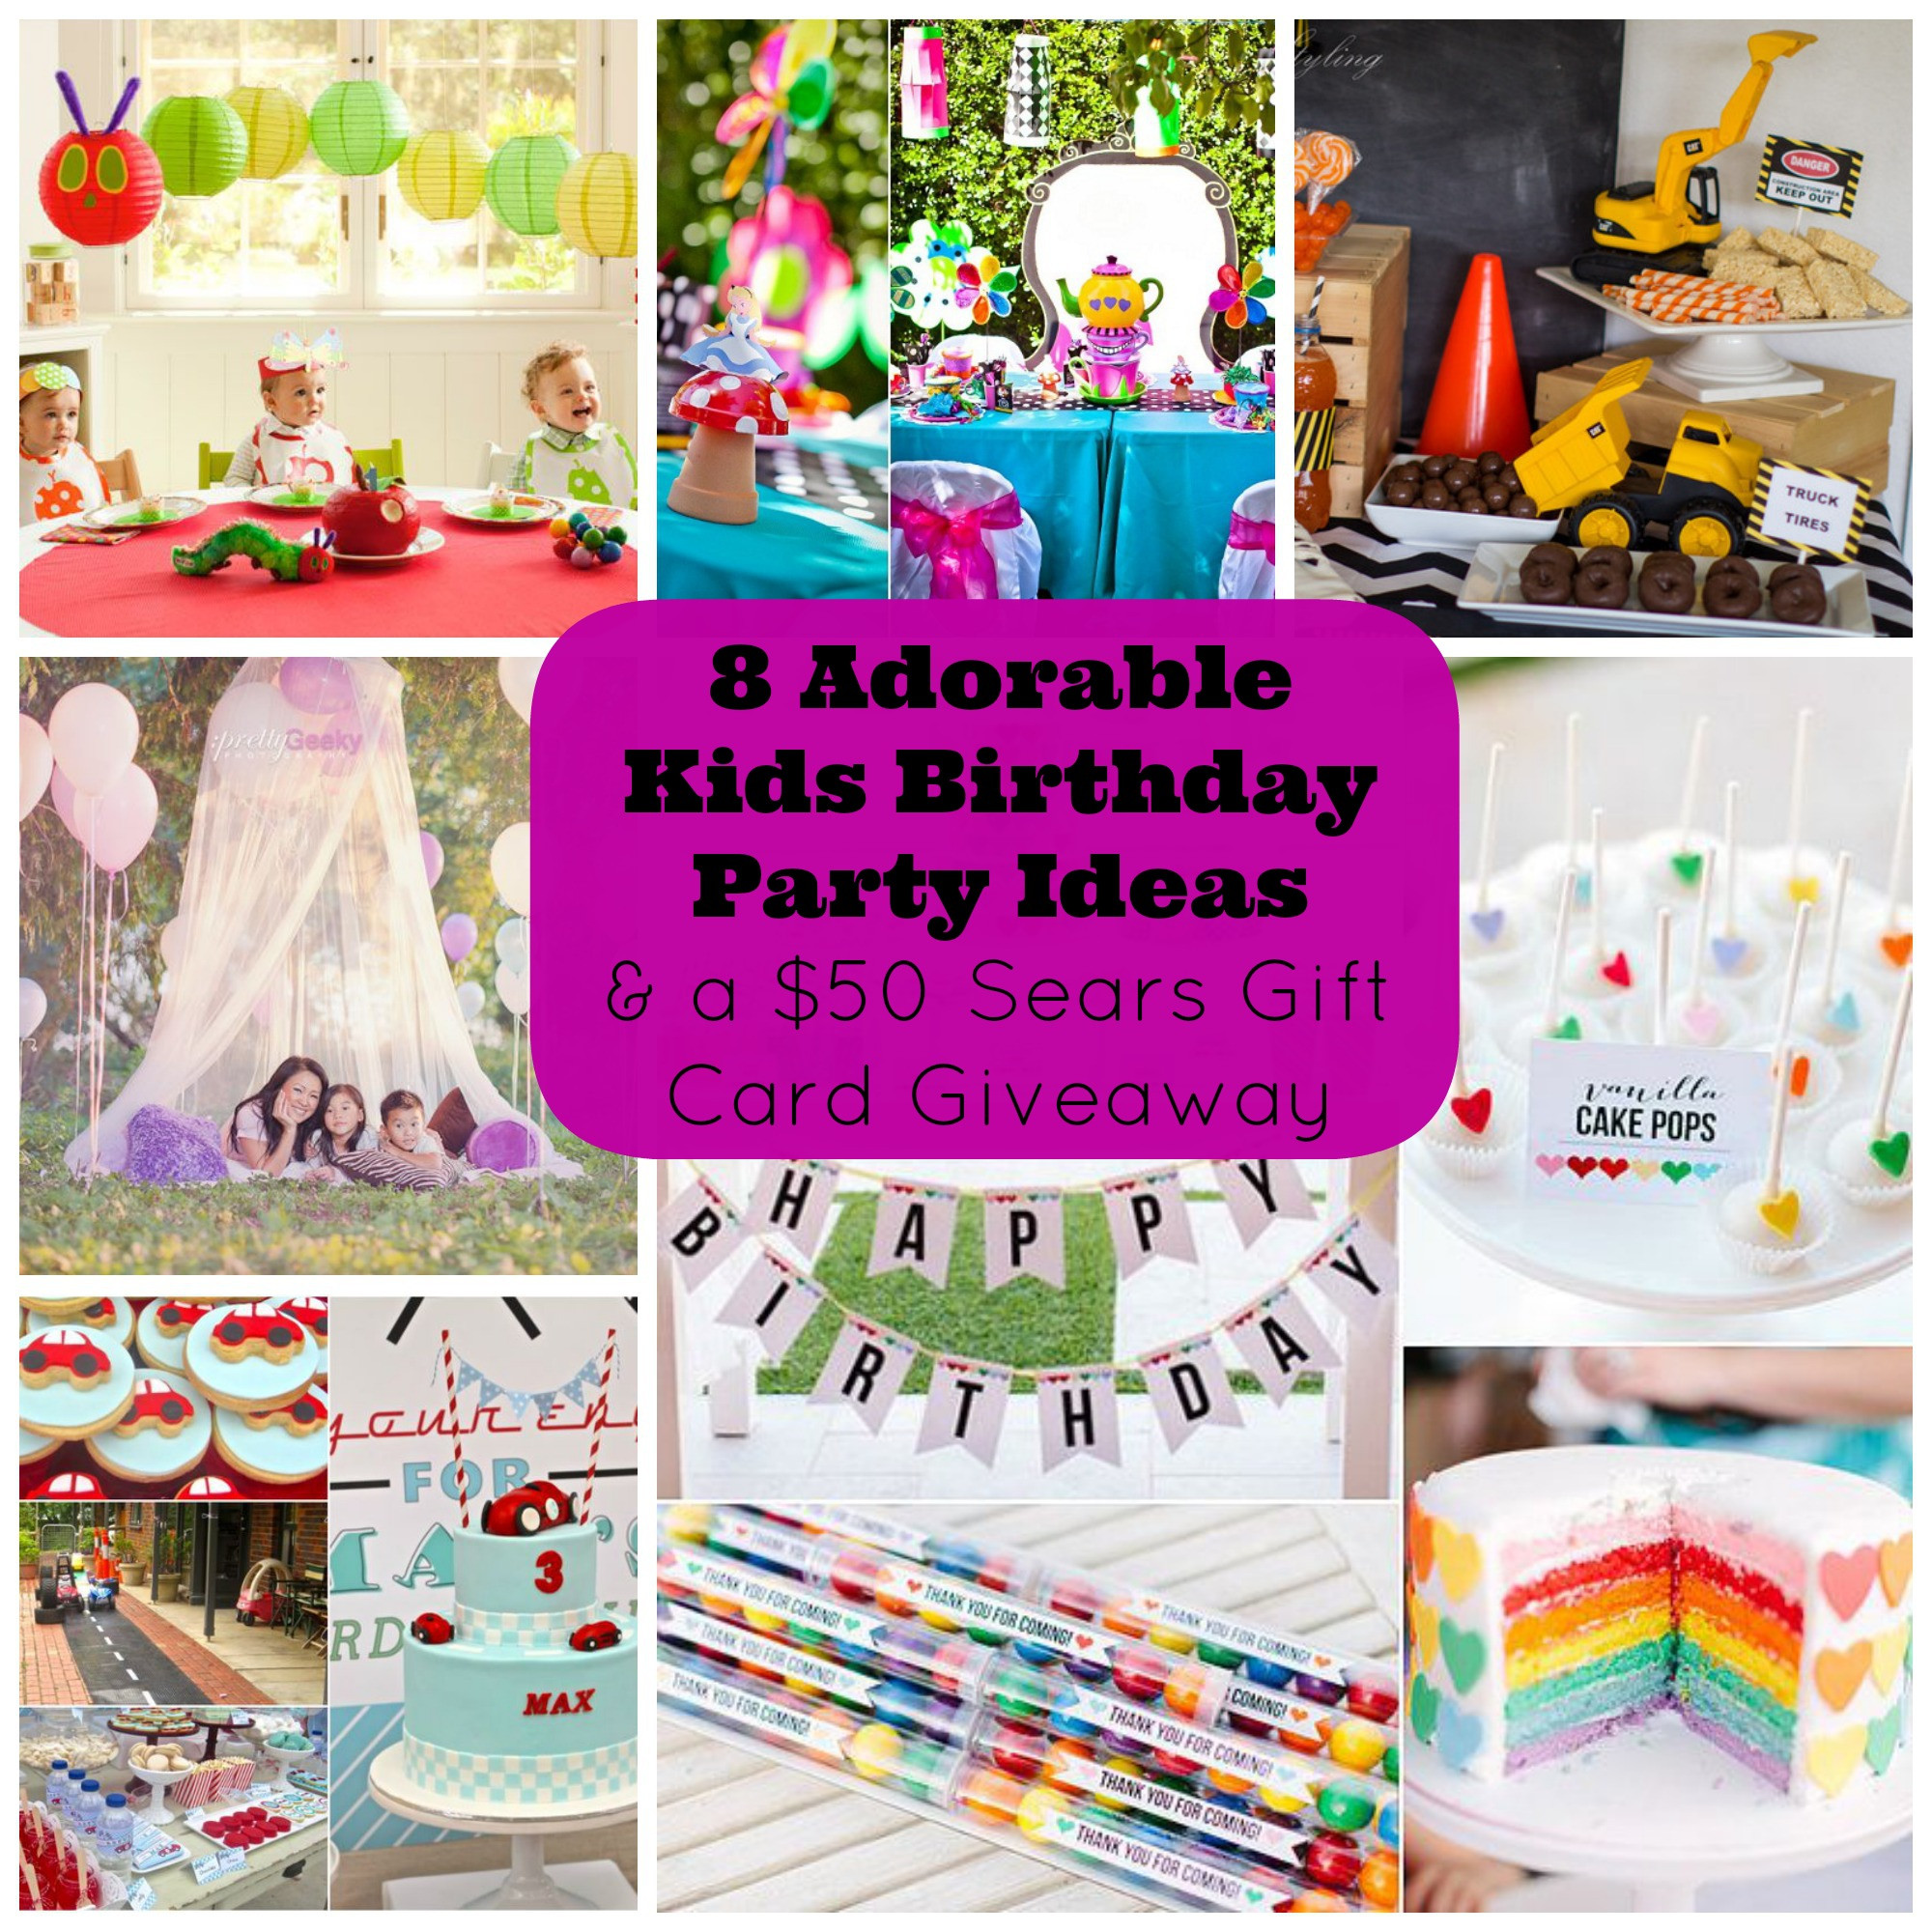 Birthday Gift Ideas For Kids
 8 Adorable Kids Birthday Party Ideas and a Giveaway for a